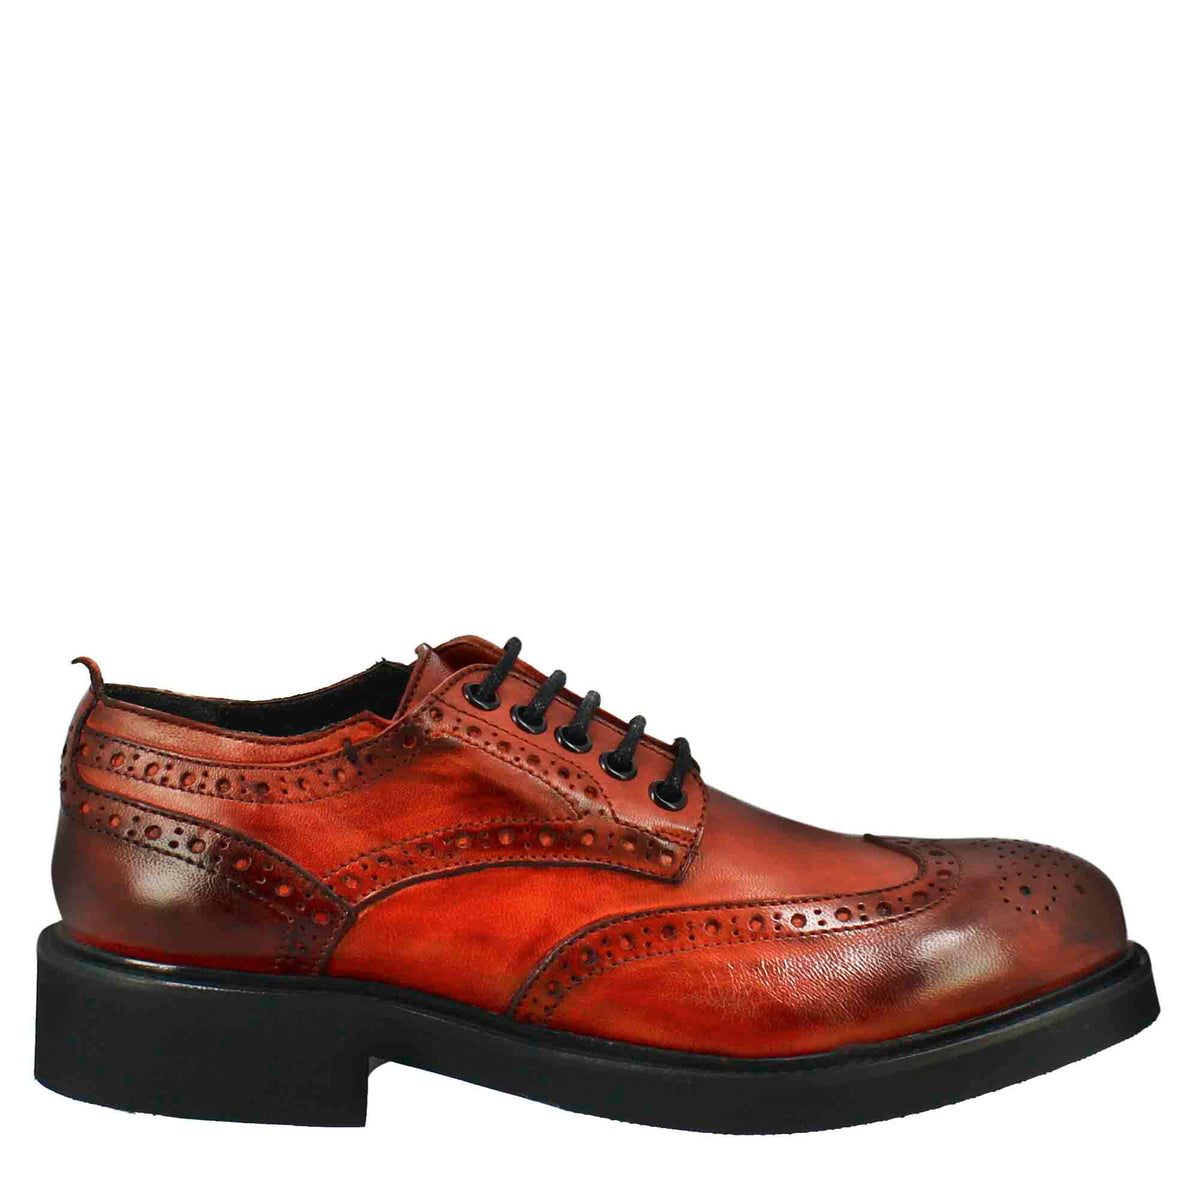 Women's derby with paupa brogue details in red washed leather